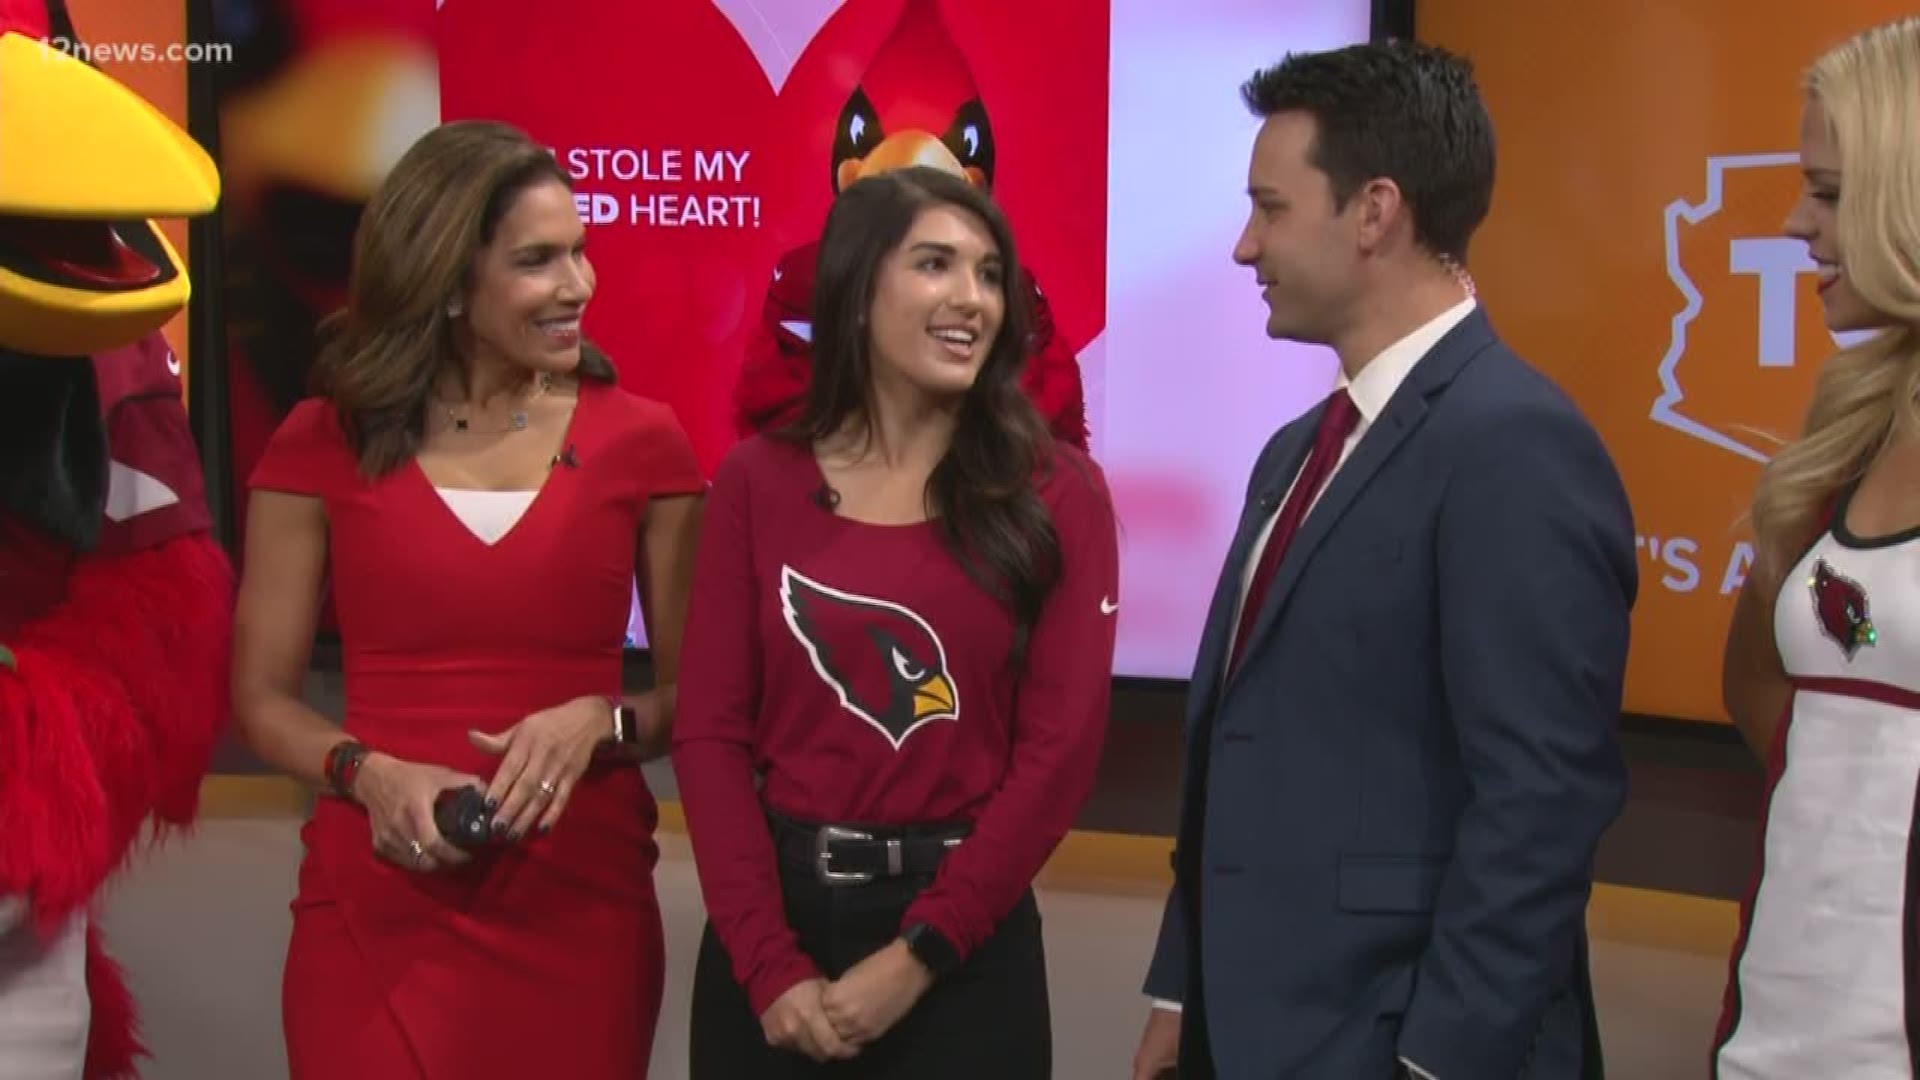 The Arizona Cardinals are surprising six teachers with Big Red and some flowers on Valentine's Day.